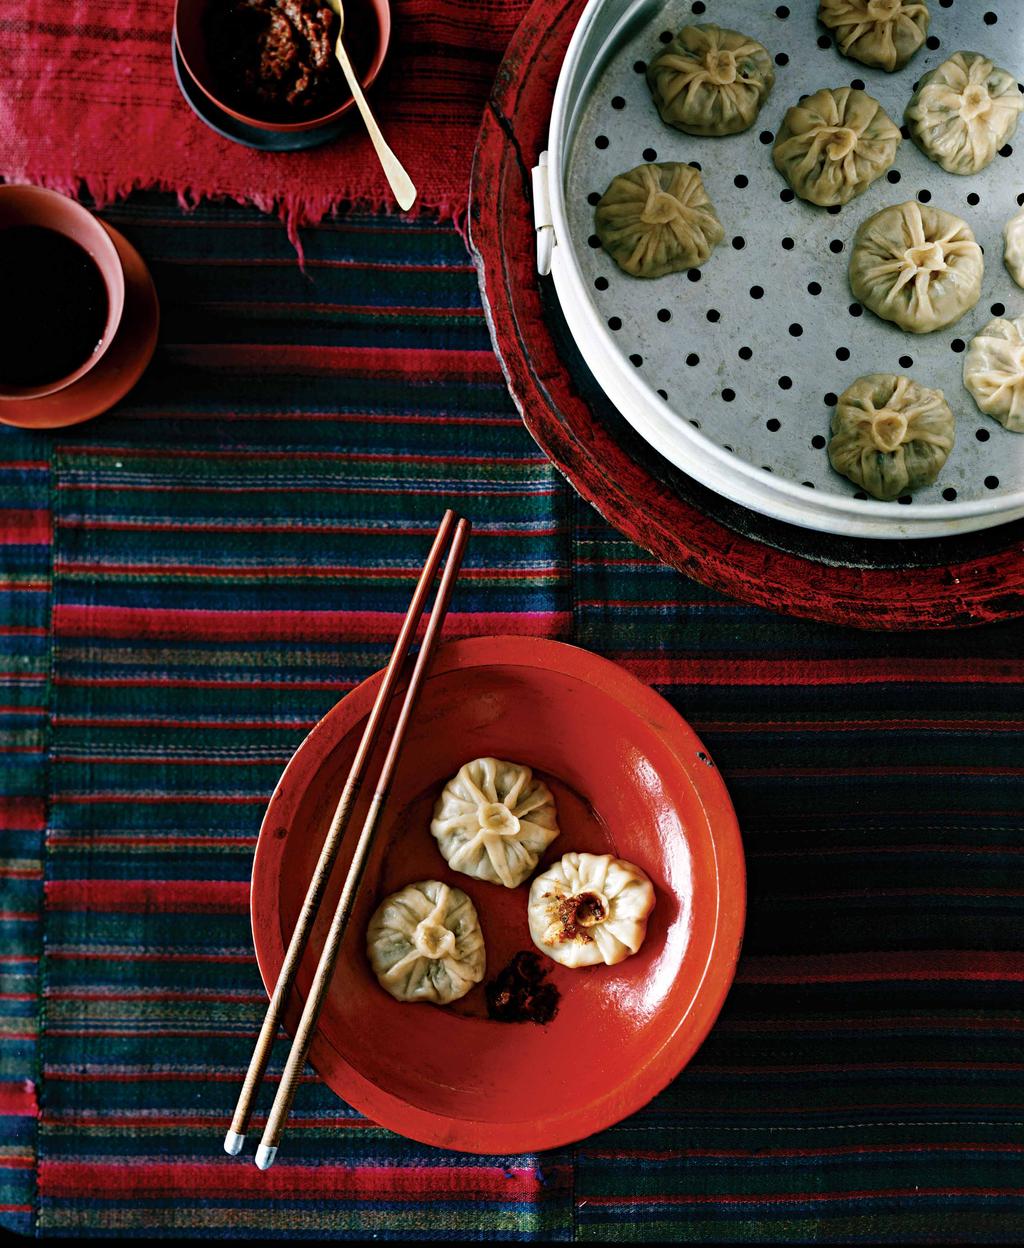 NEPAL momos MOMOS In the Himalayas, fluted purses of steamed dough are a cornerstone of almost every meal.